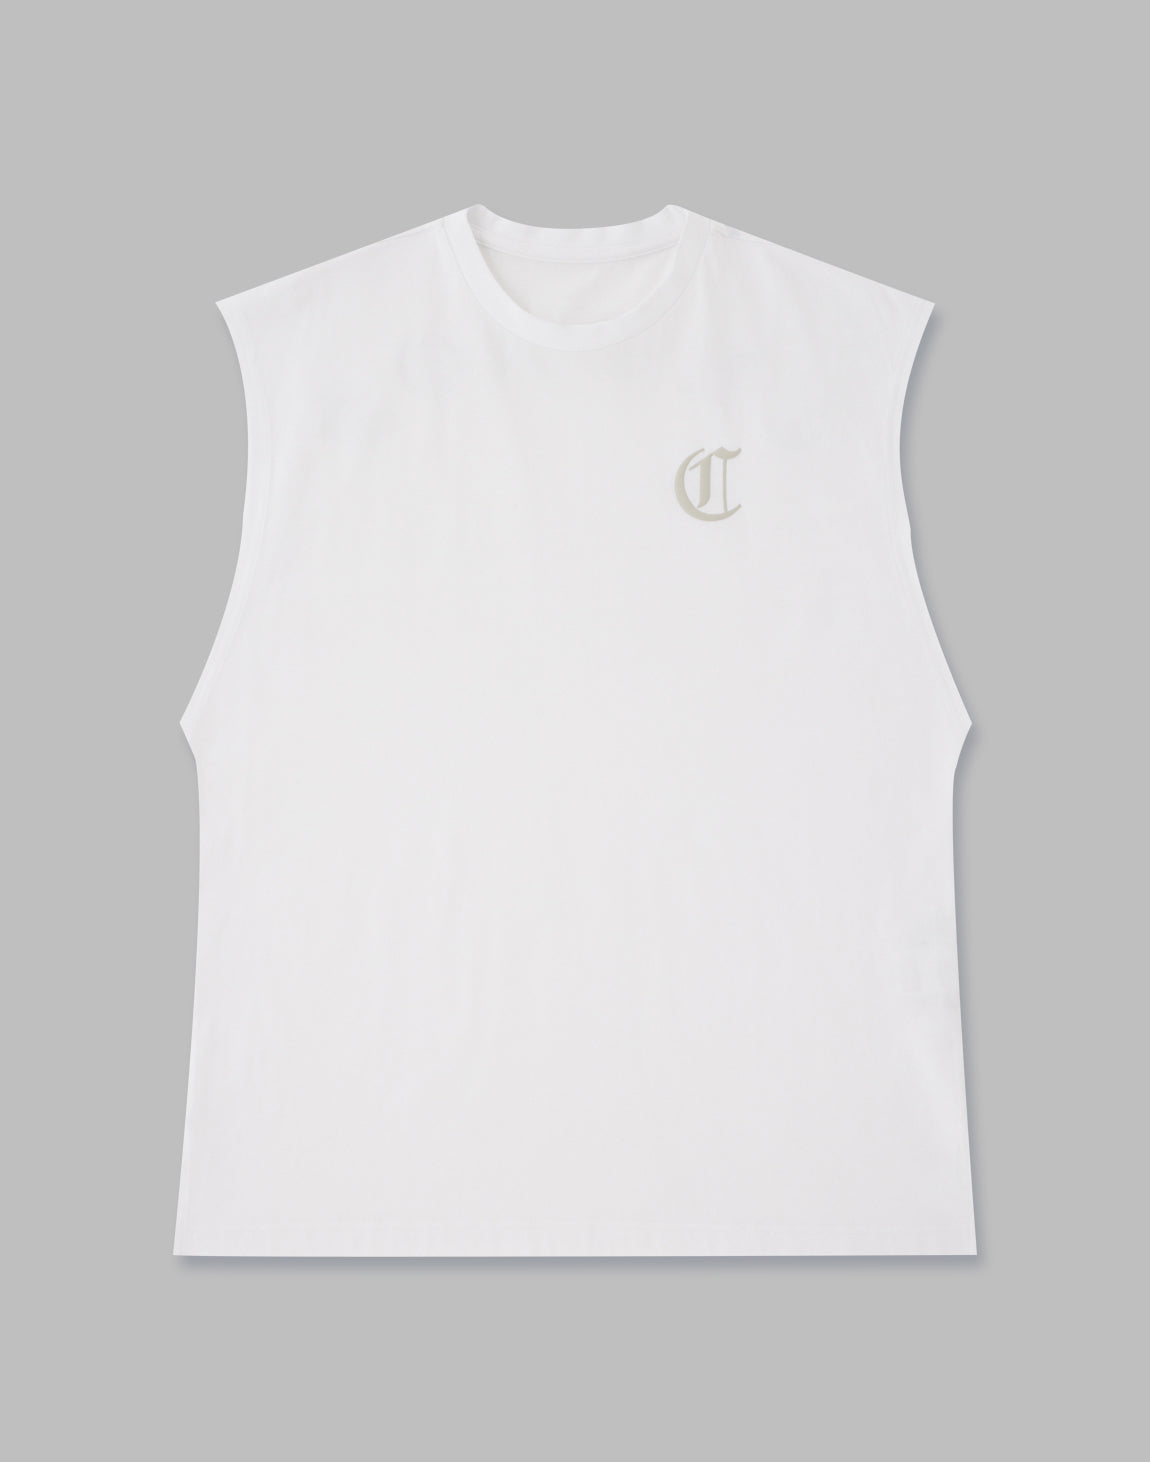 CRONOS BLACK LETTER SLEEVELESS – クロノス CRONOS Official Store